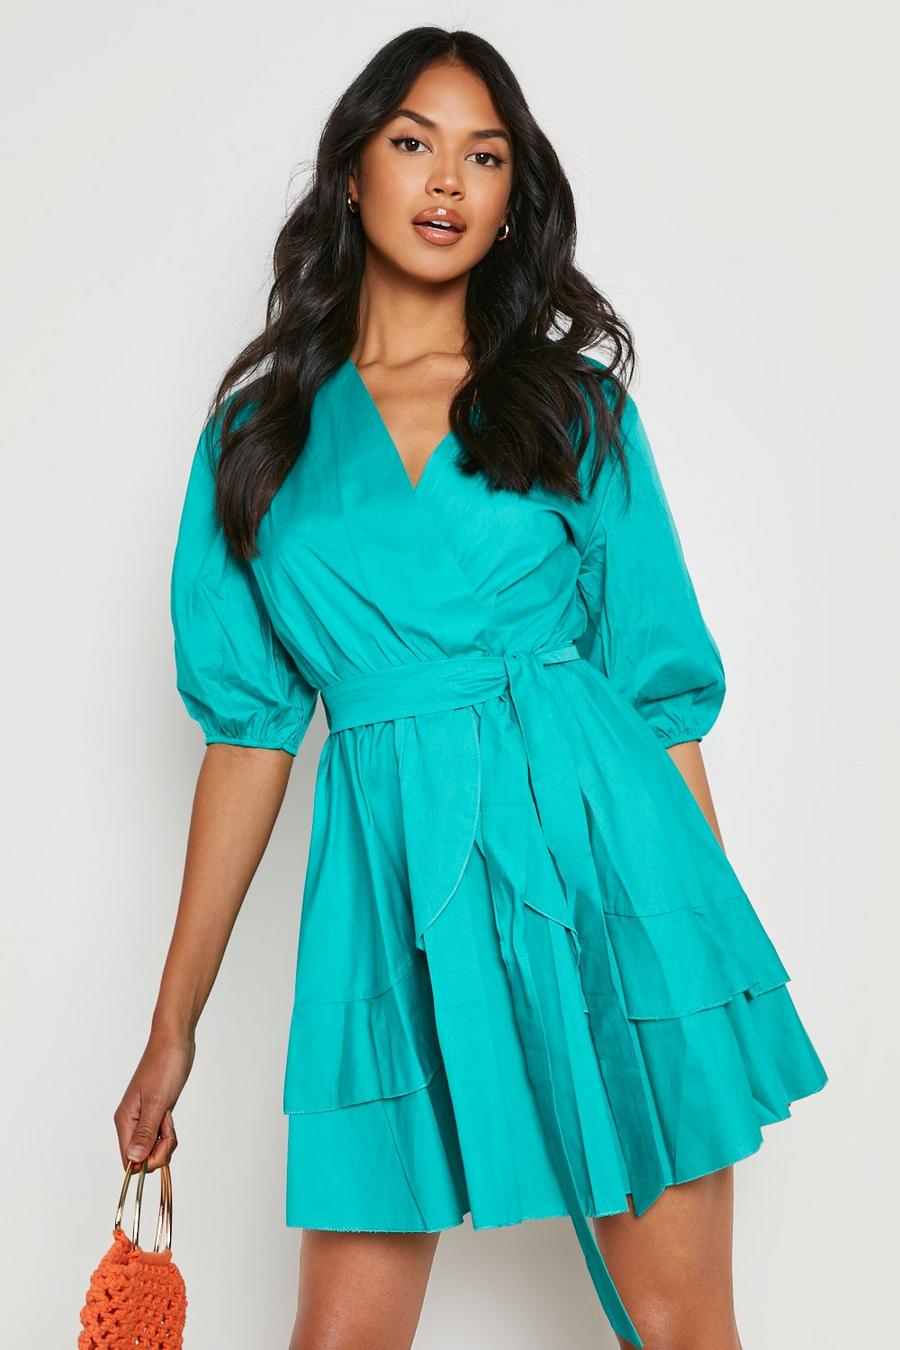 Teal Cotton Ruffle Belted Skater Dress